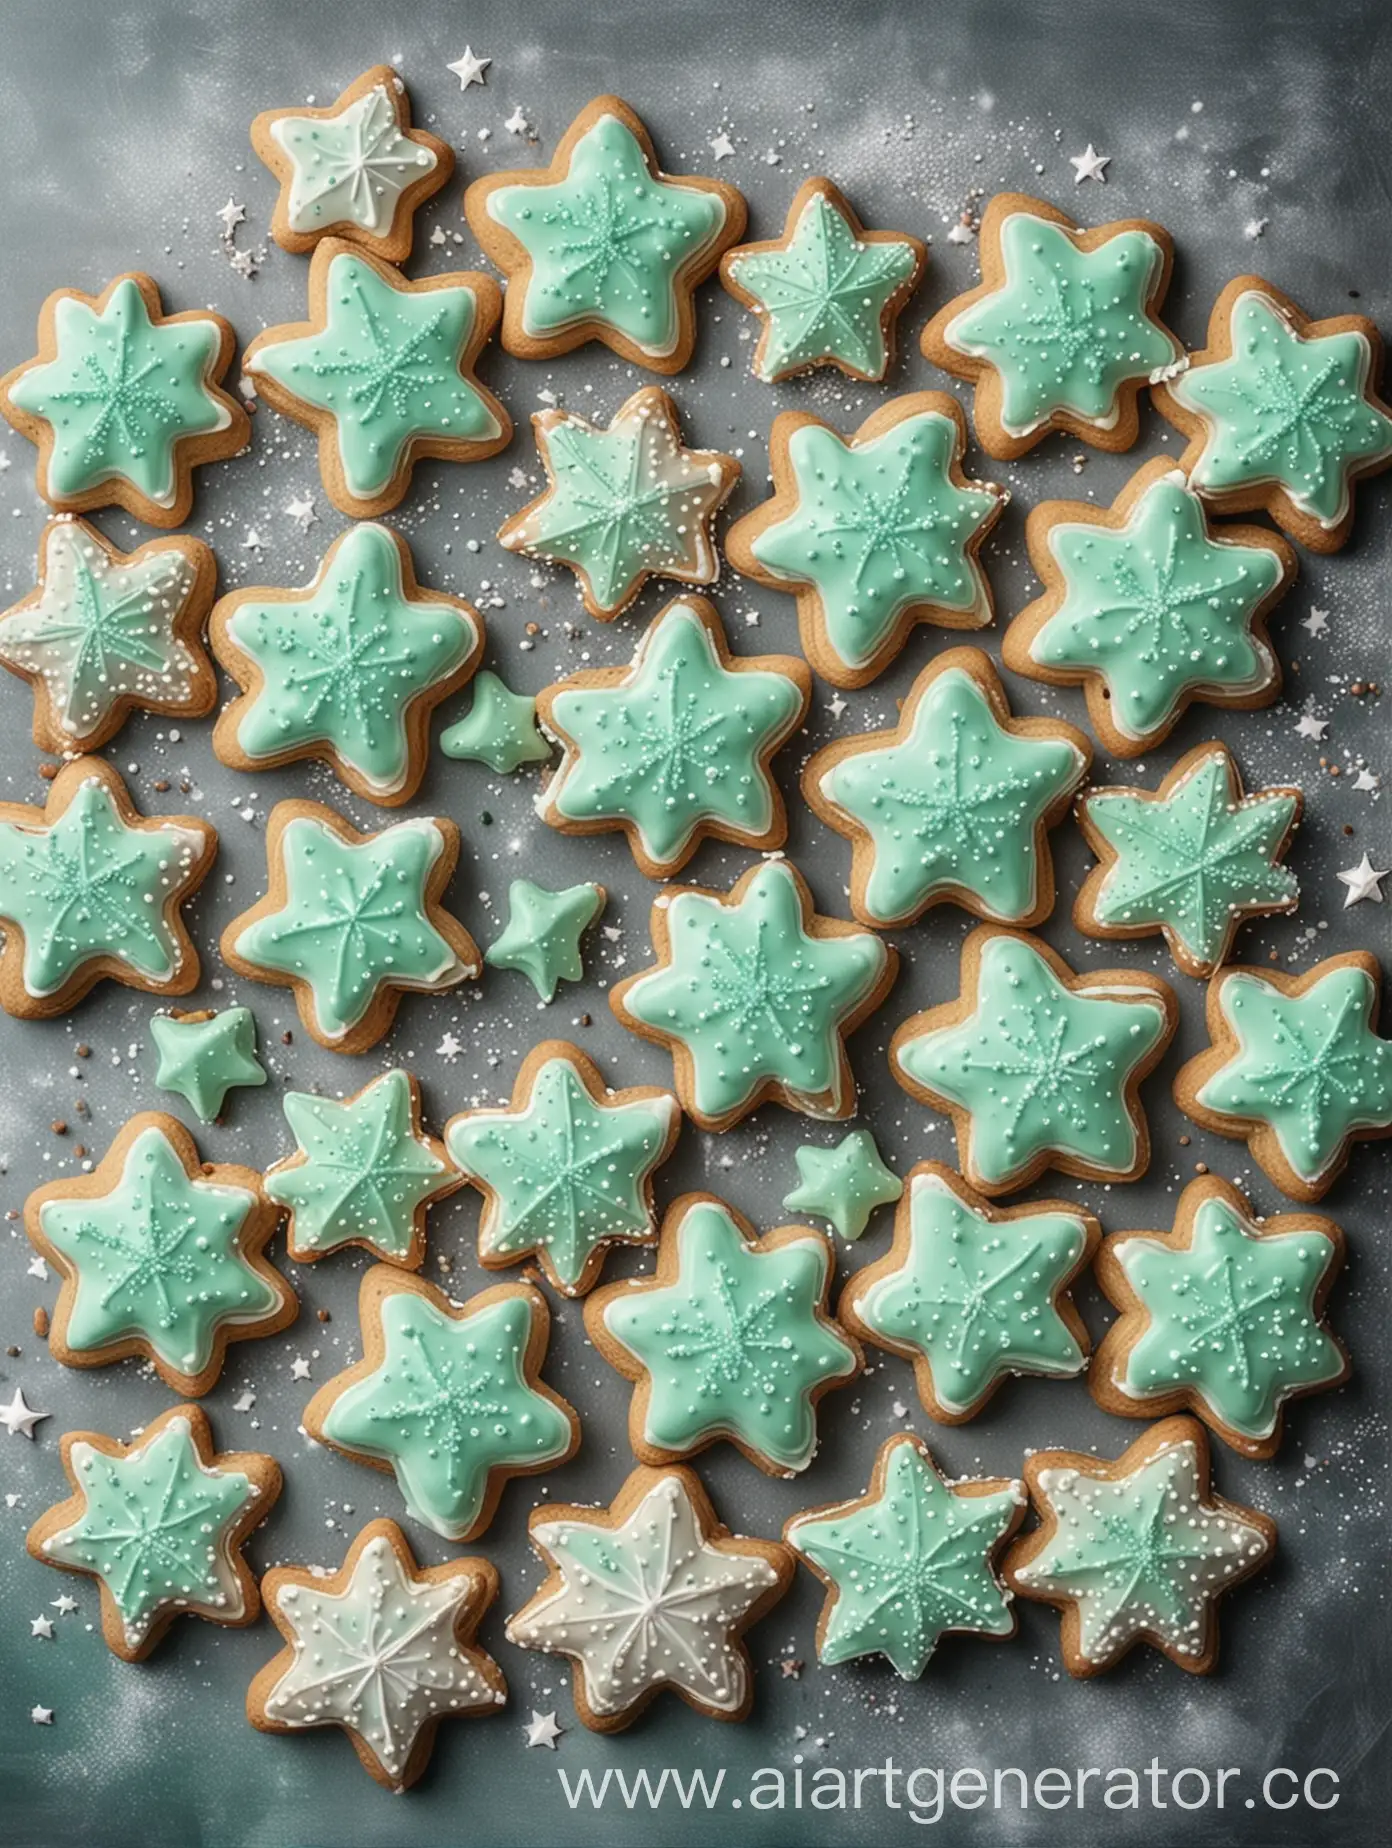 Minty-Gingerbread-Cookie-Creations-with-Starry-Craft-Baking-Ambiance